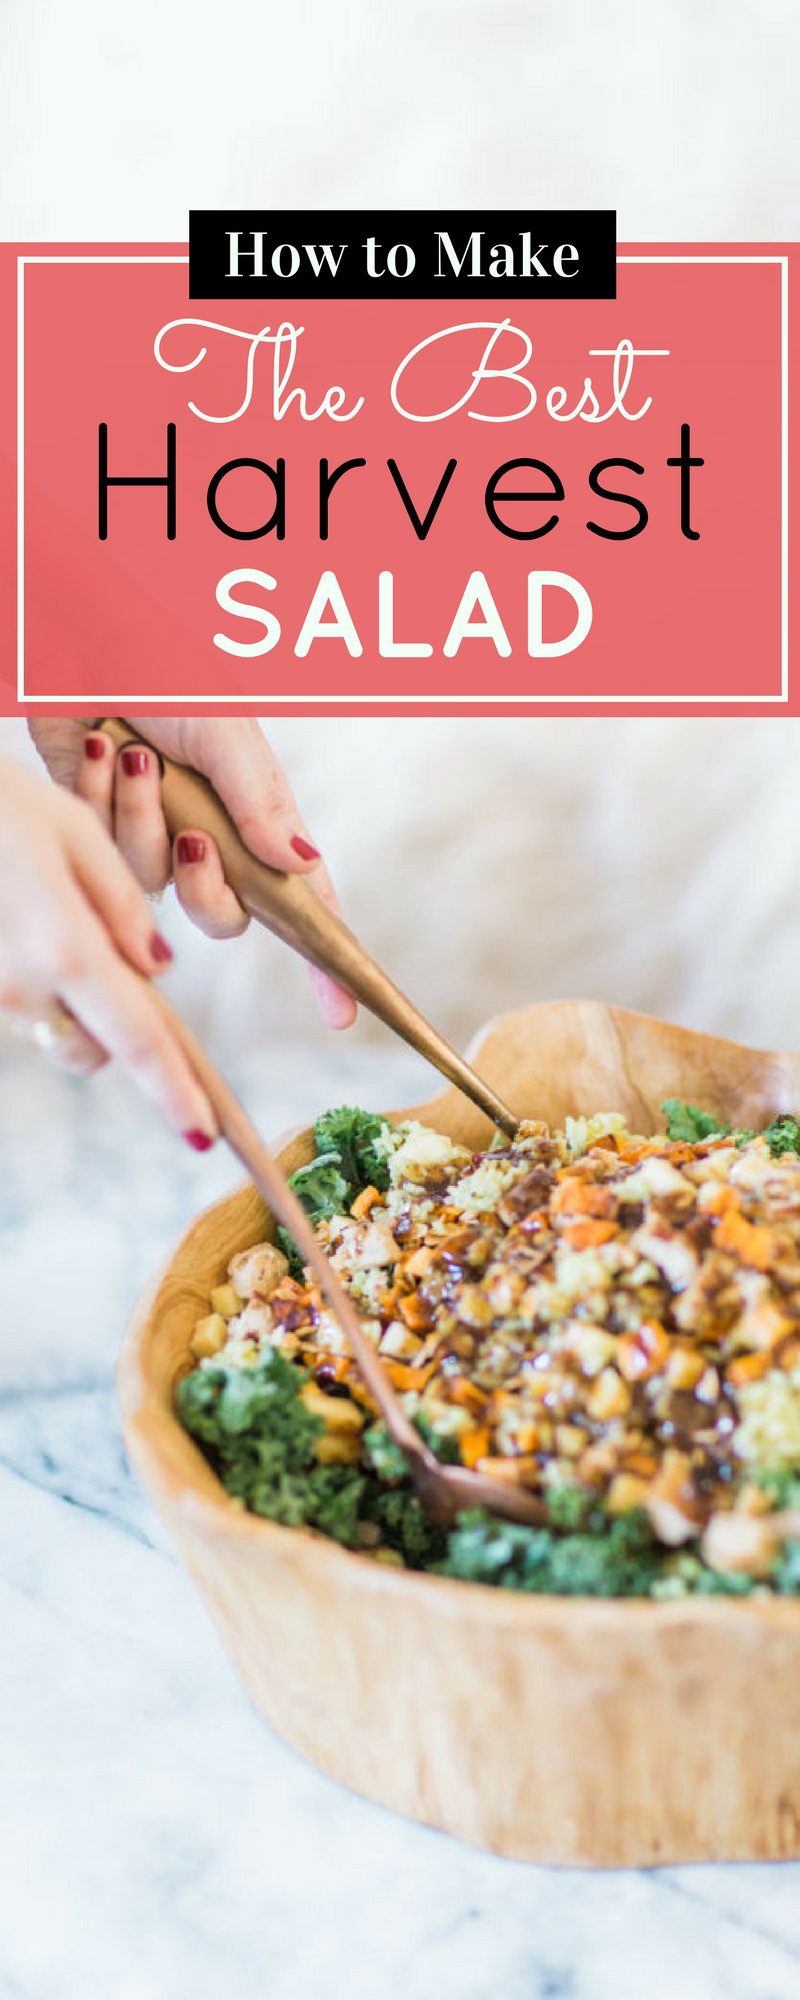 How to make the most amazing knockoff version of the harvest bowl salad at sweetgreen. This one is salad done right. Click through for the recipe. | glitterinc.com | @glitterinc